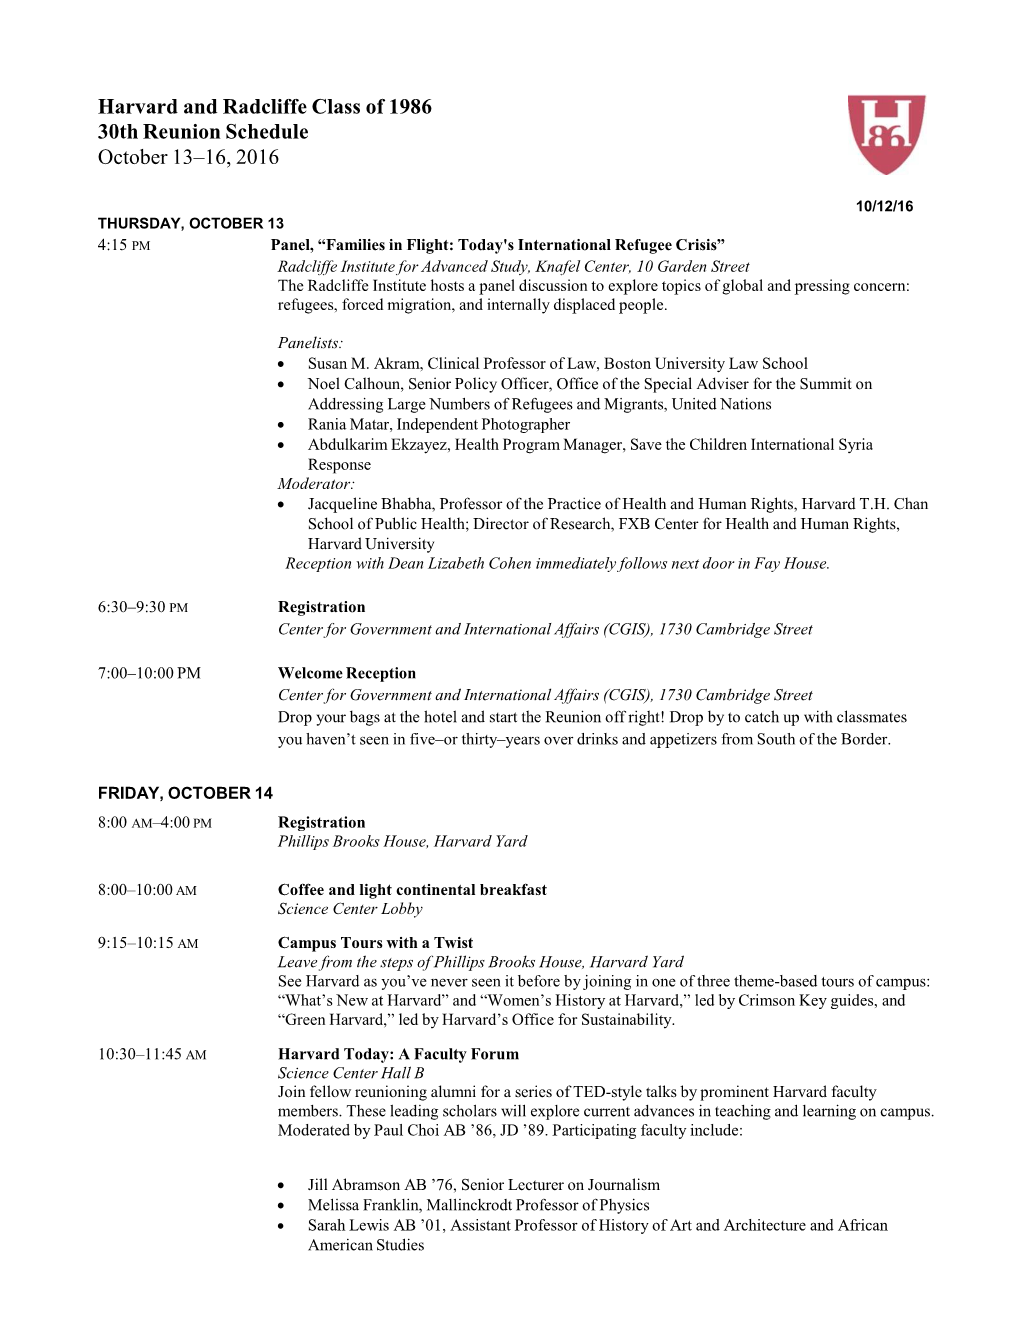 Harvard and Radcliffe Class of 1986 30Th Reunion Schedule October 13–16, 2016